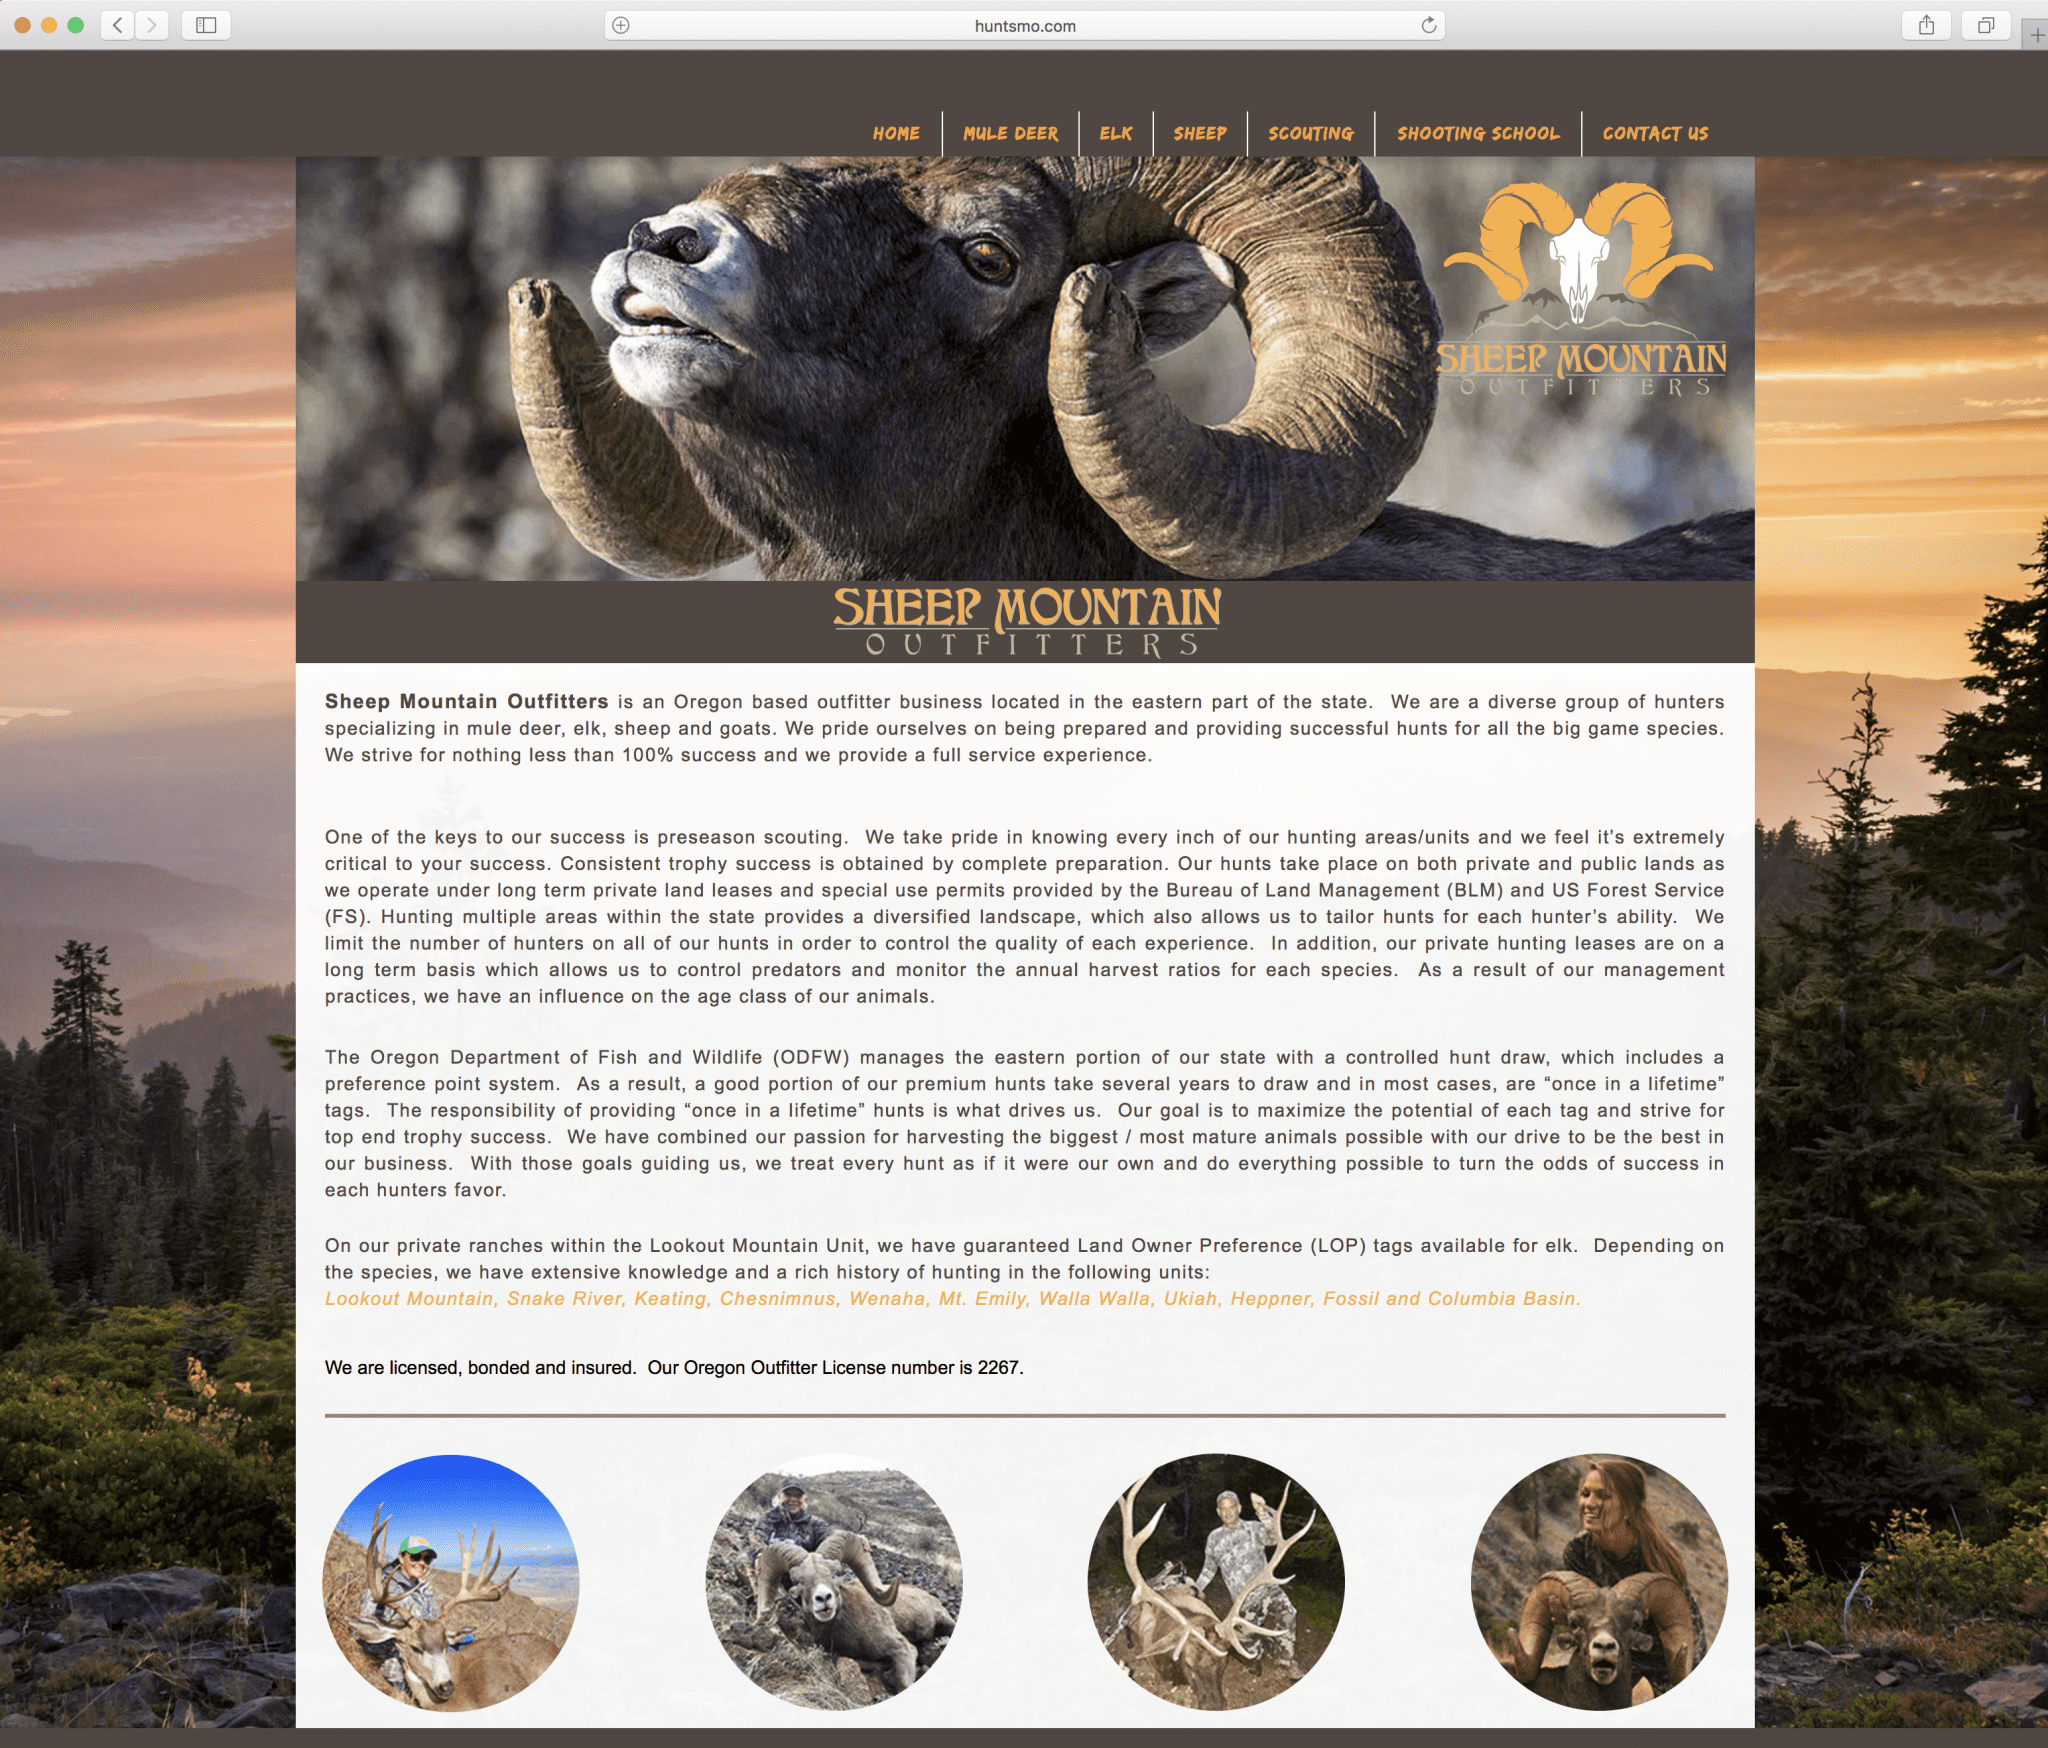 Sheep Mountain Outfitters